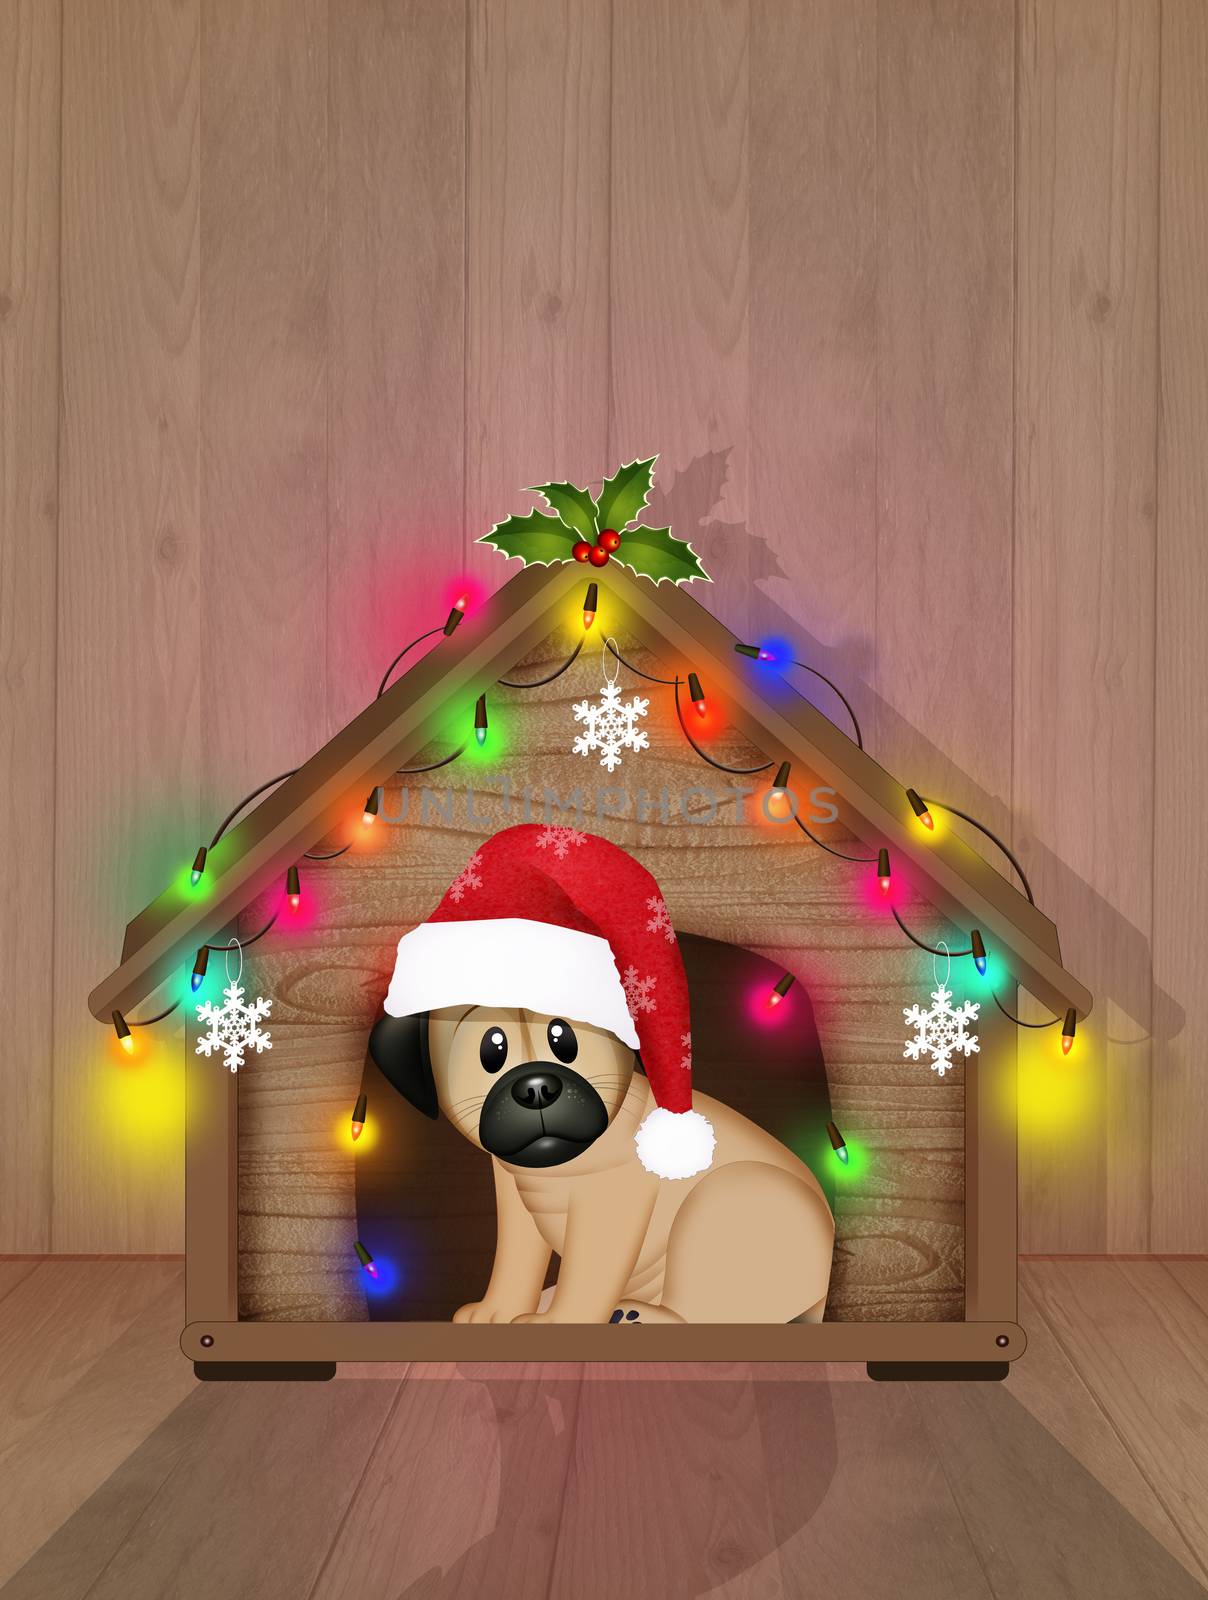 dog kennel decked out for Christmas by adrenalina